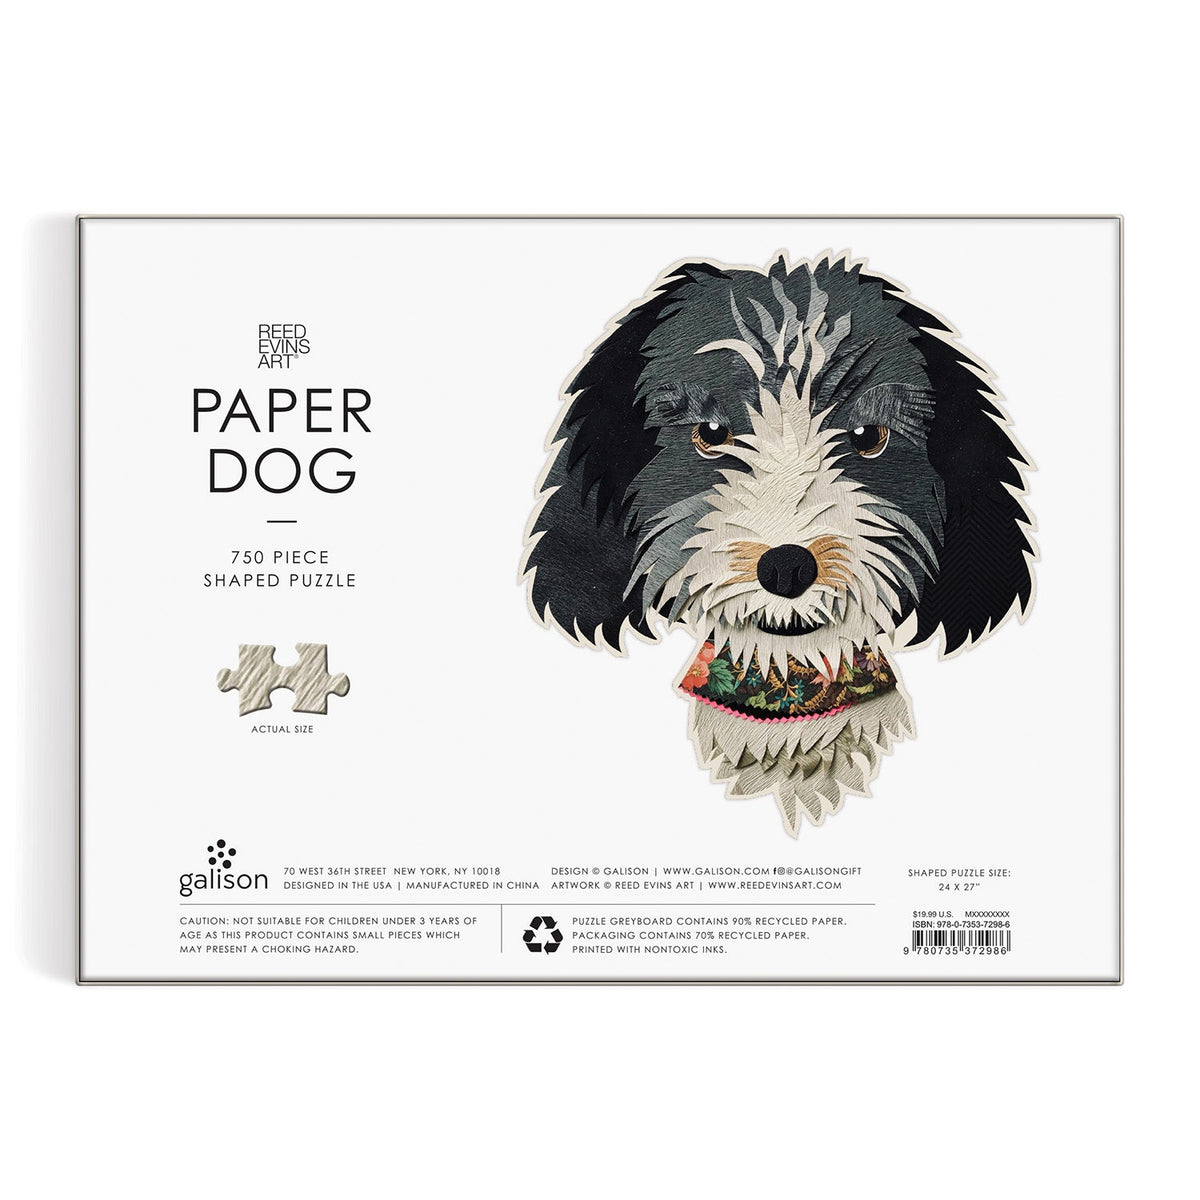 The Best Jigsaw Puzzles for Dog Lovers